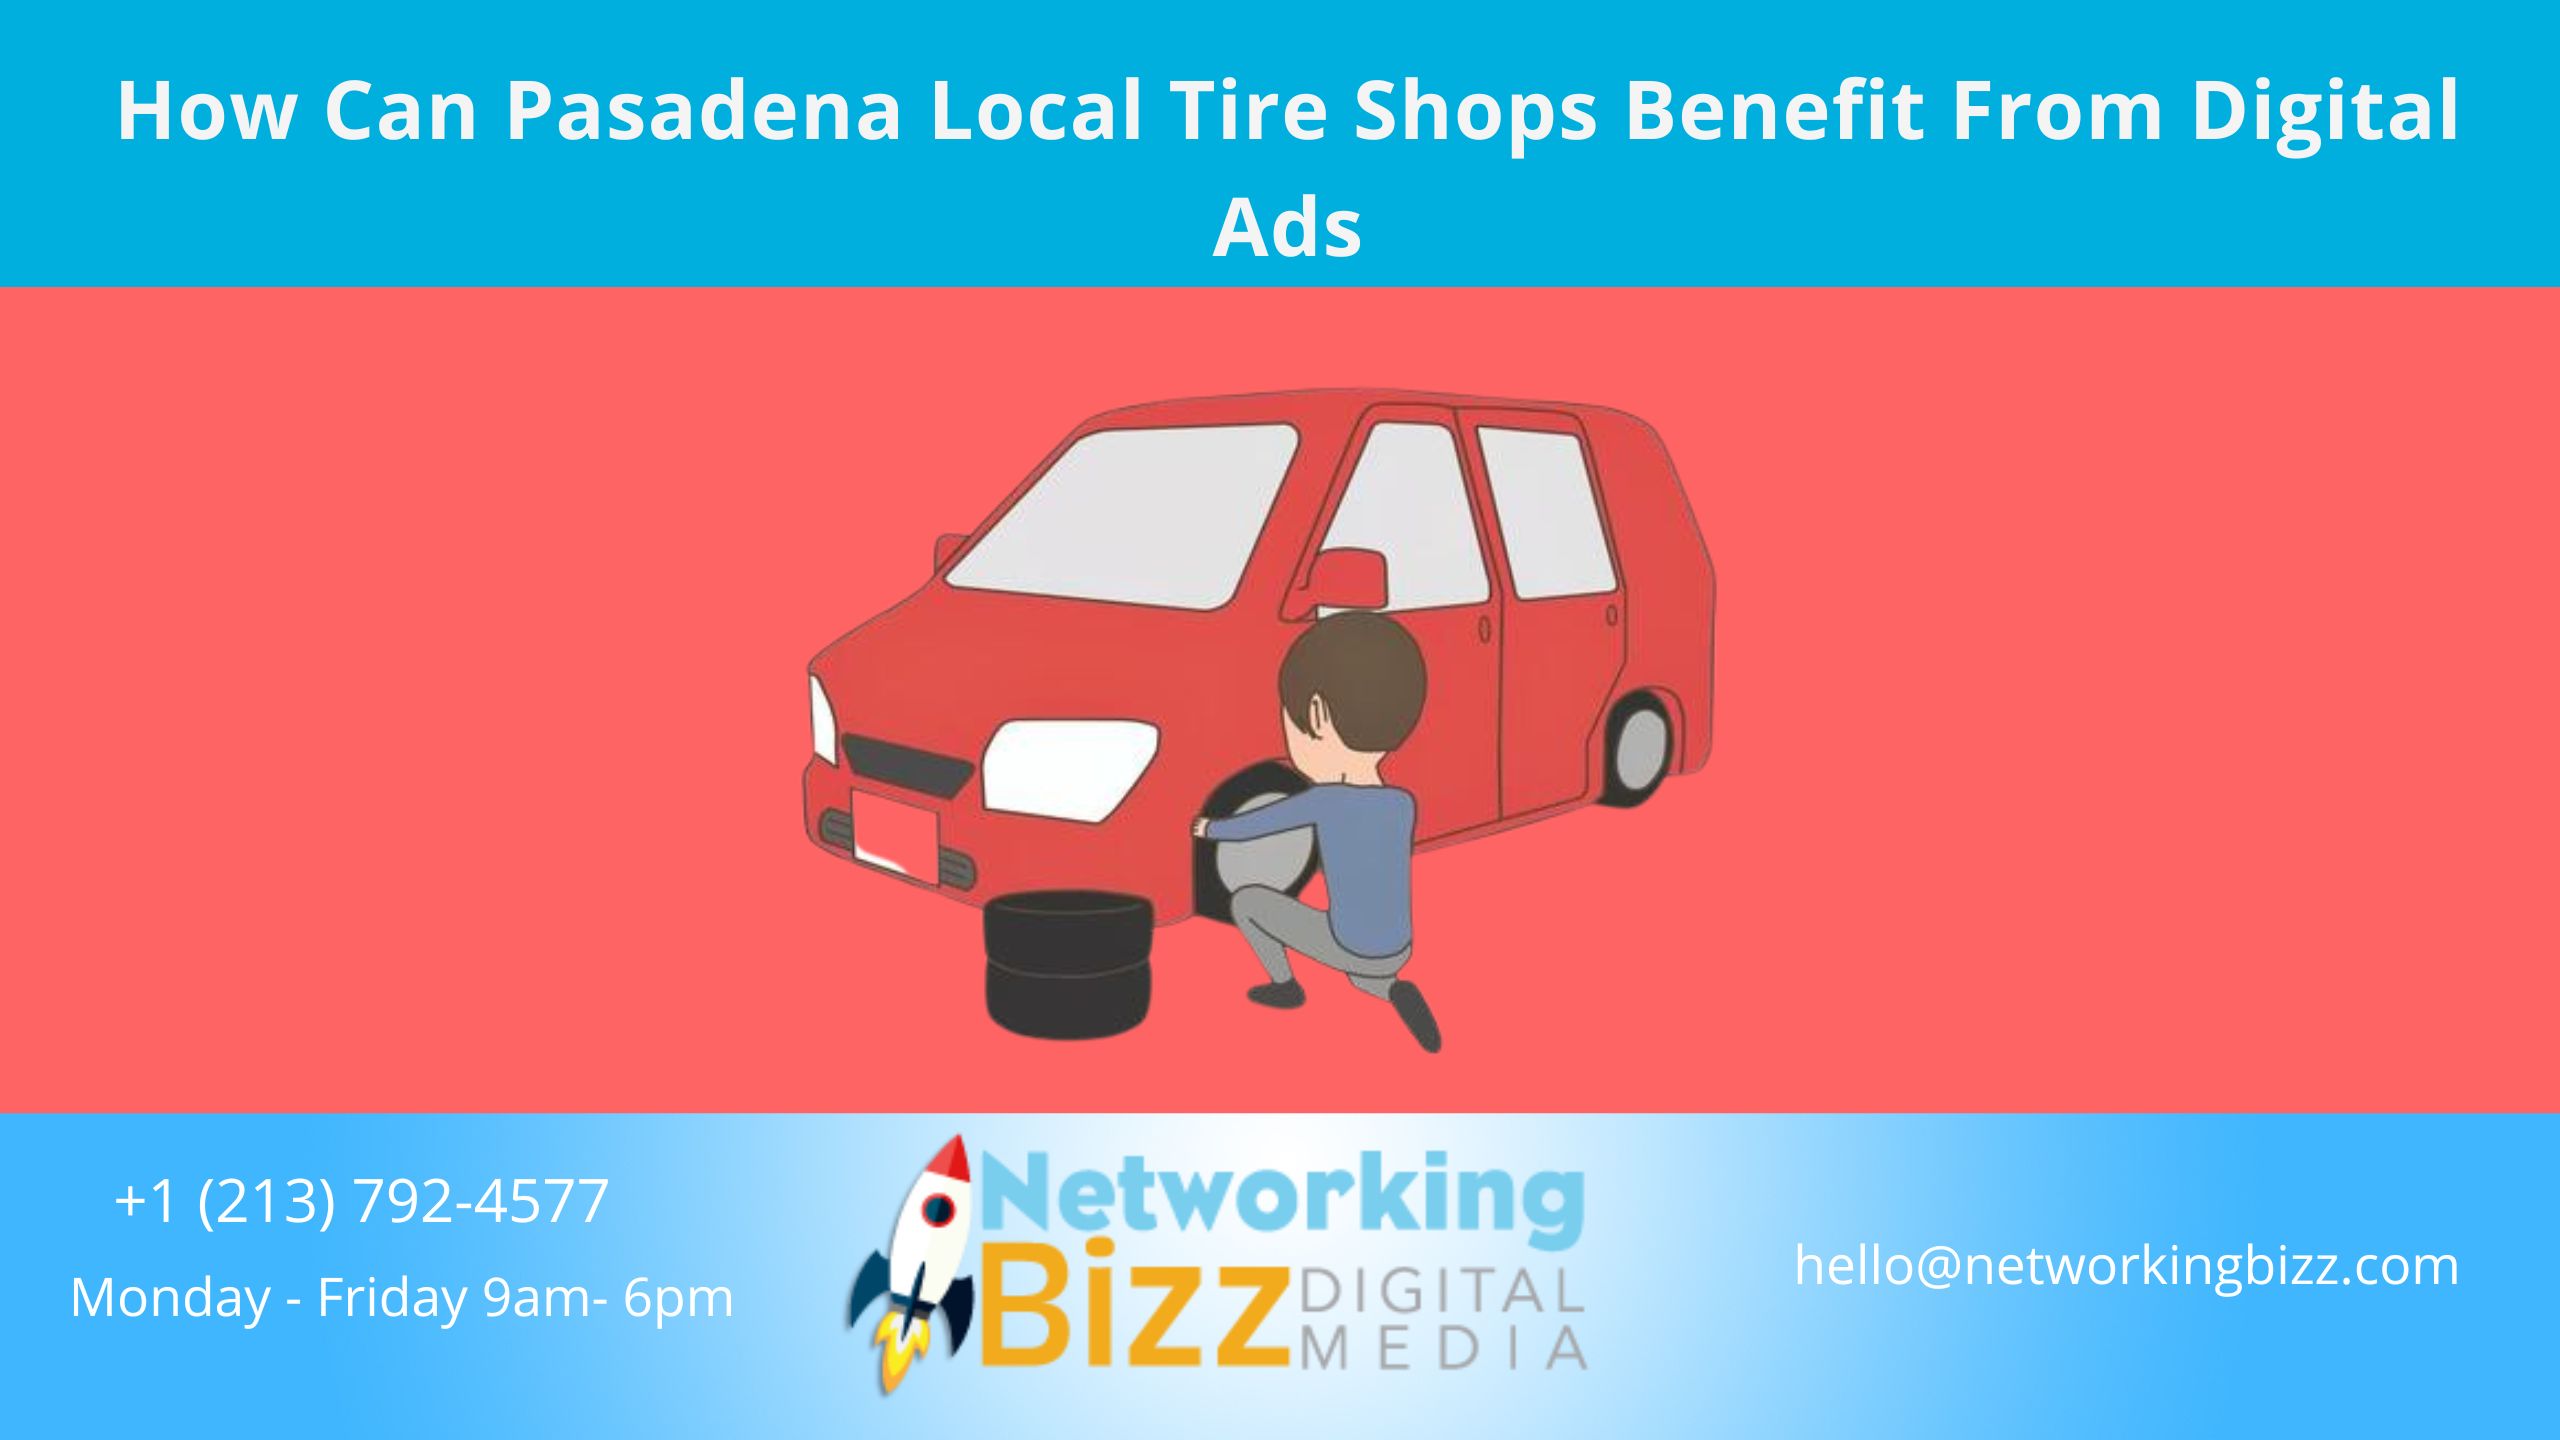 How Can Pasadena Local Tire Shops Benefit From Digital Ads